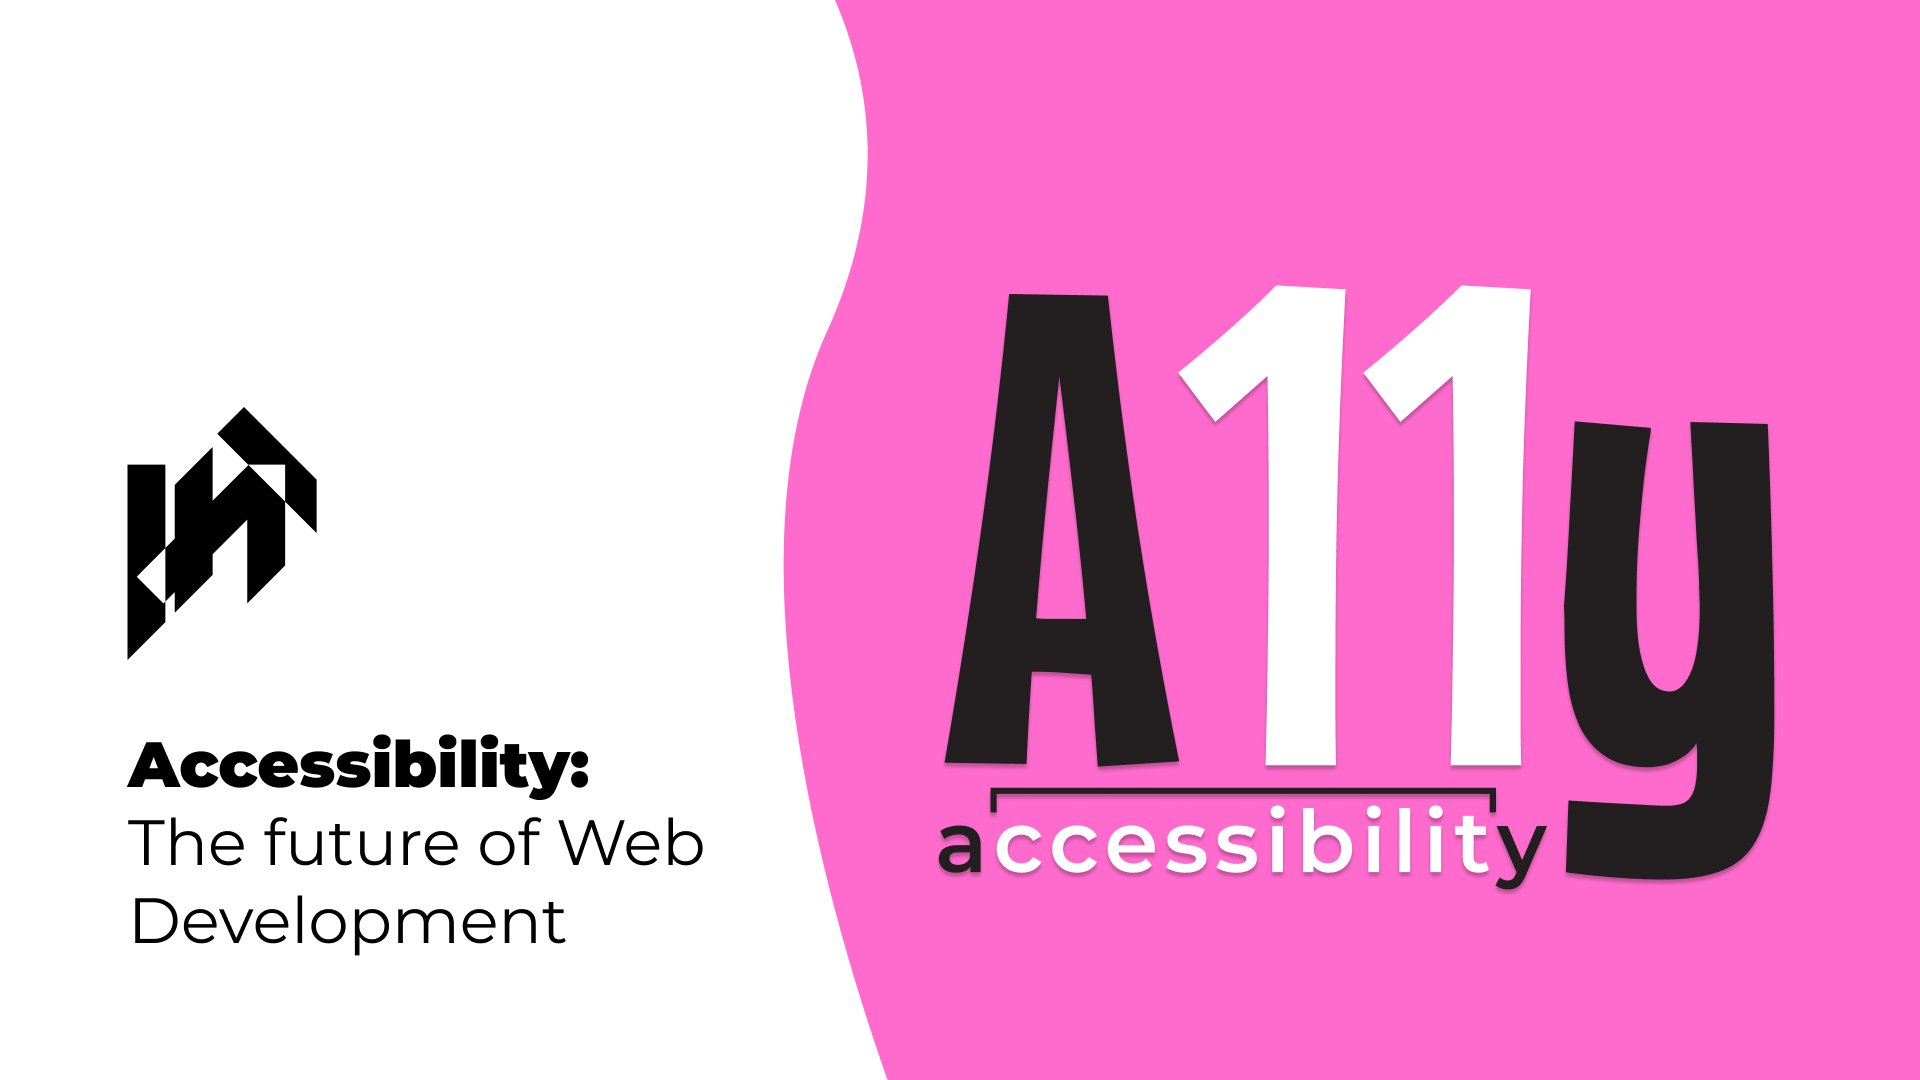 Image of Accessibility: The future of Web Development